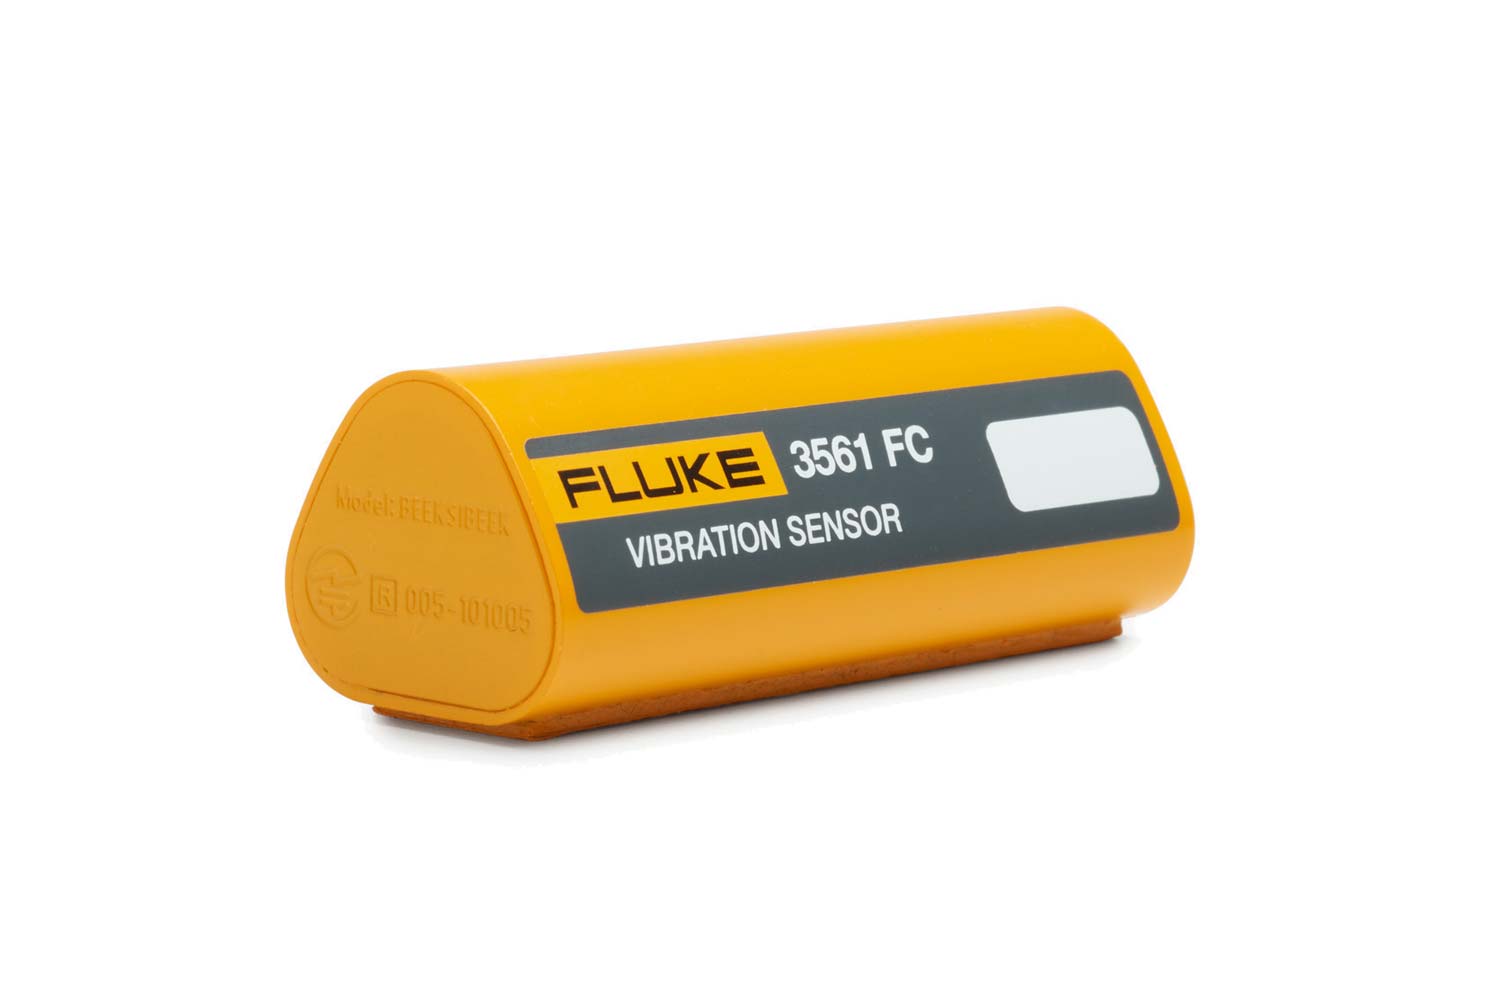 A clickable image of a Fluke 3561 FC Vibration Sensor. Leads to the product page.